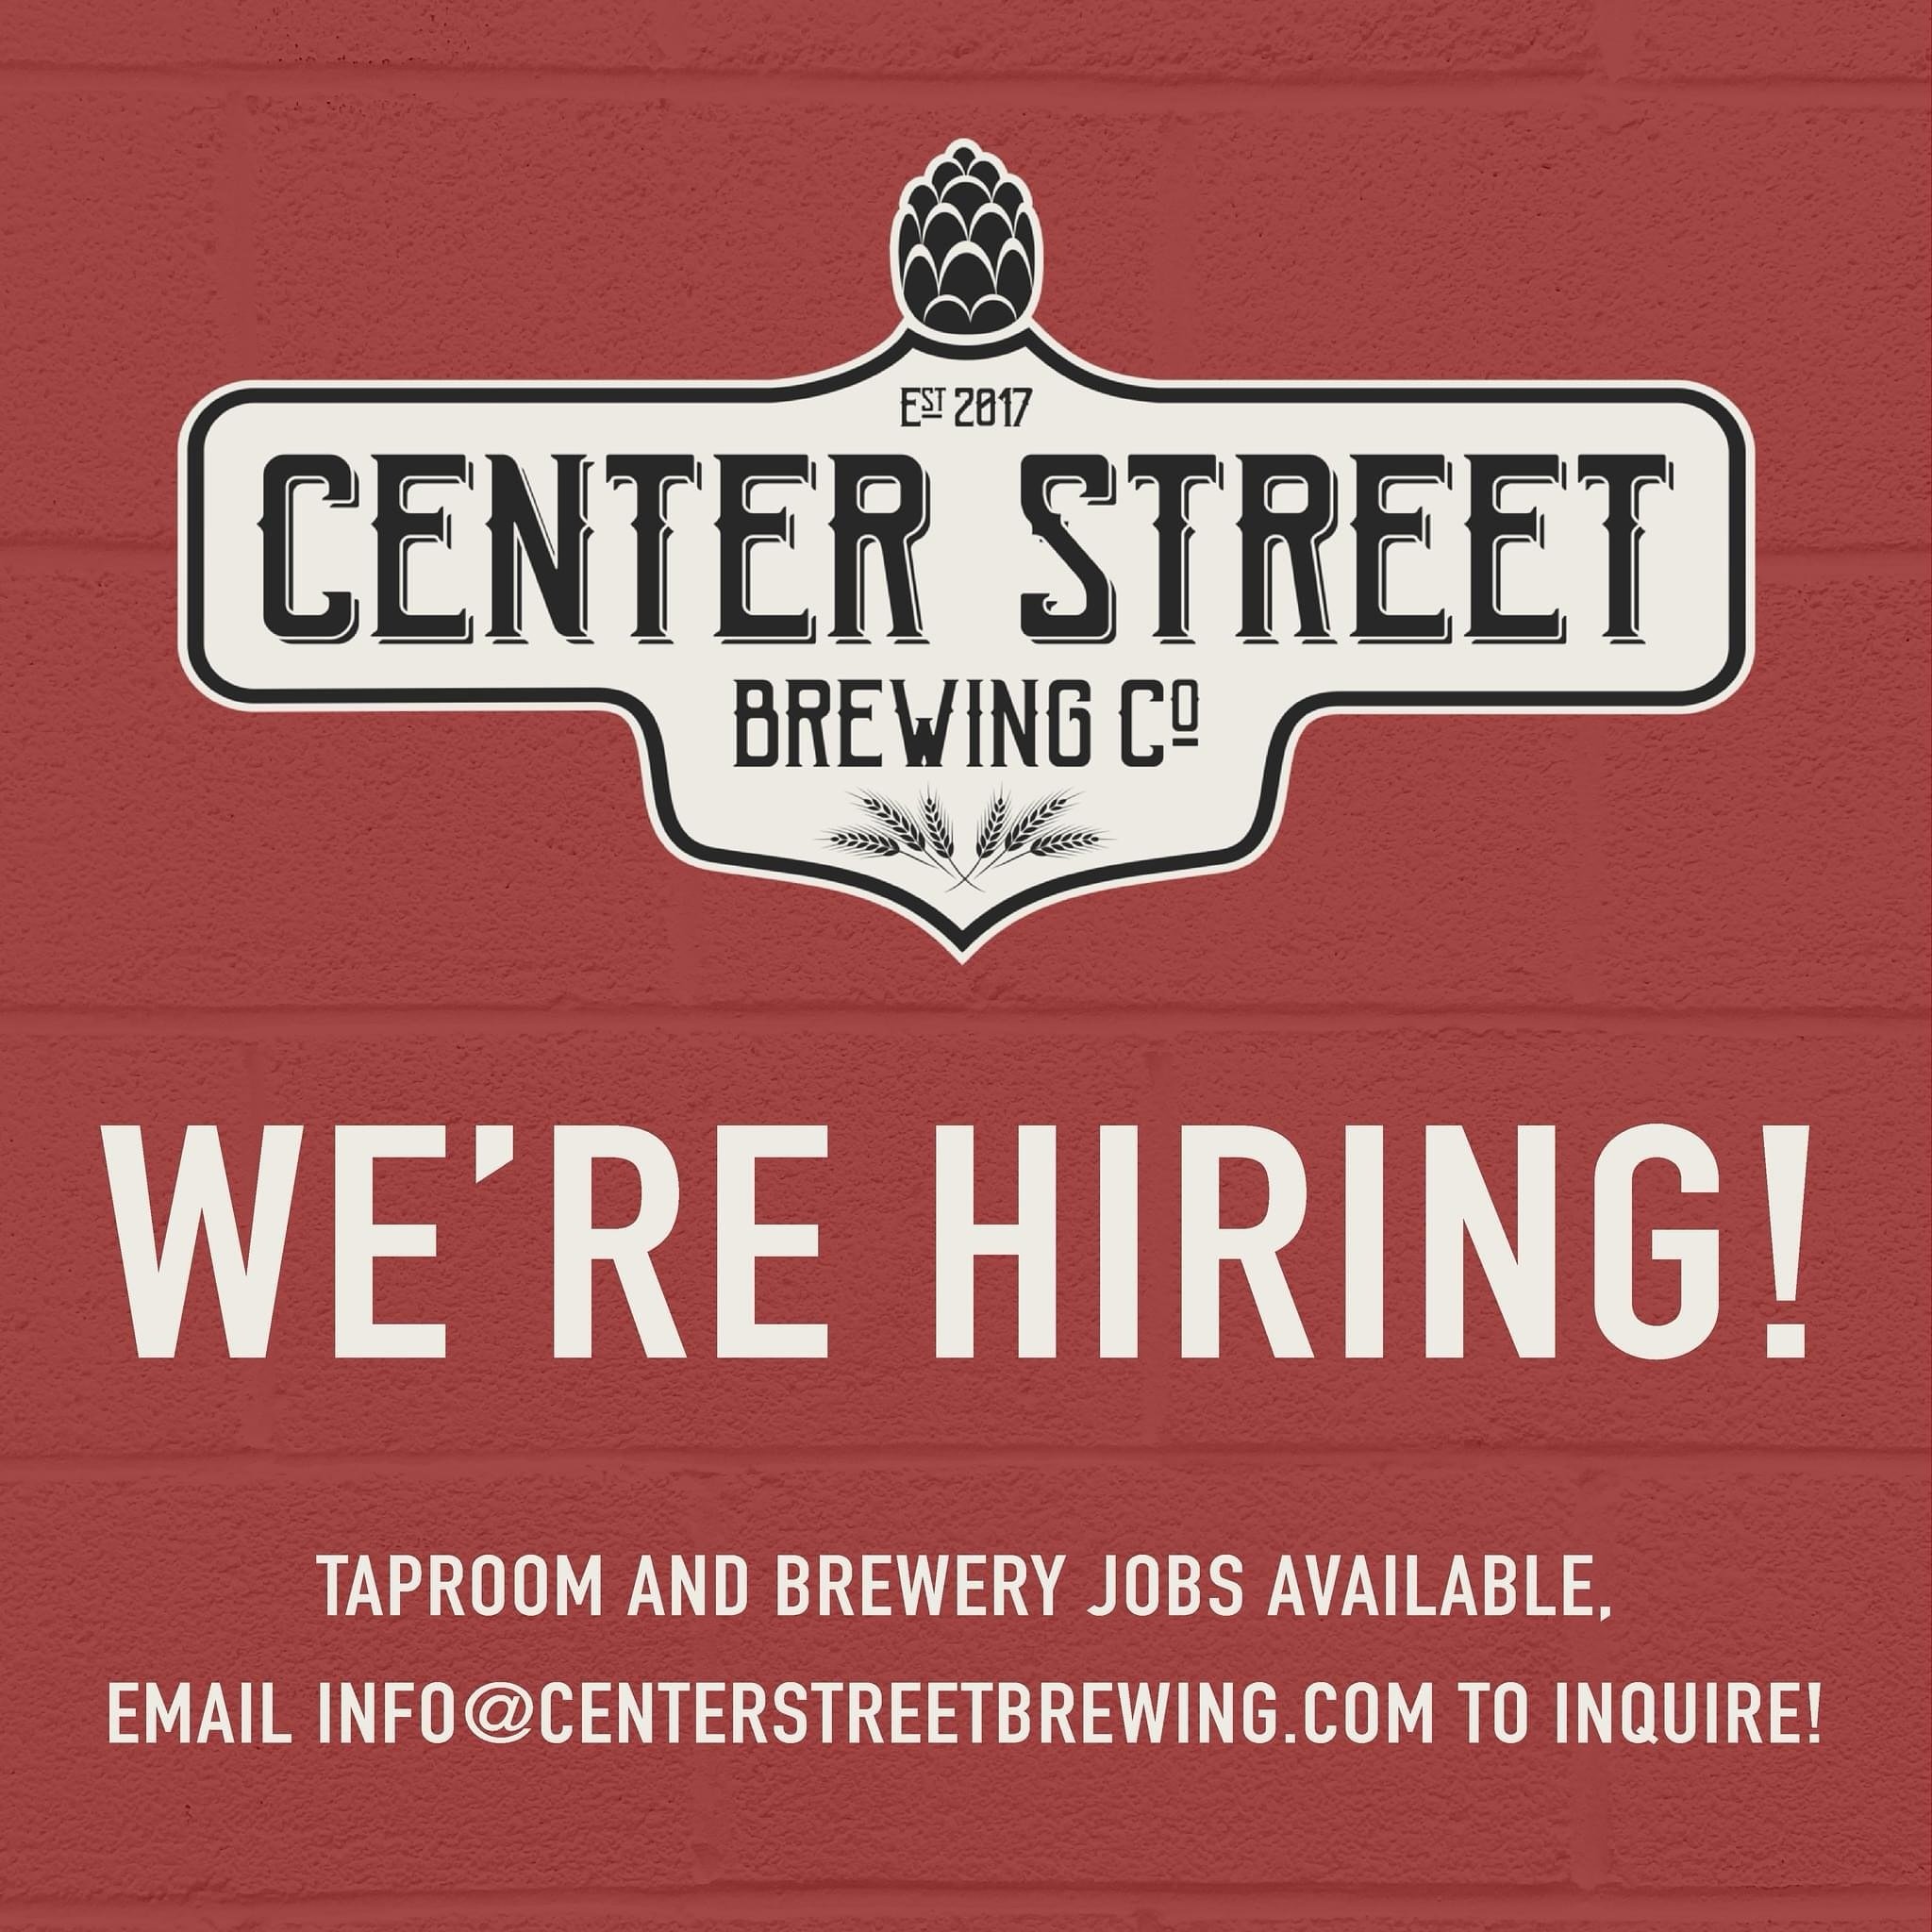 Interested in working in the brewing industry? CSBC is currently hiring taproom and brewing positions! To learn more about the job openings, email us at info@centerstreetbrewing.com. Cheers!